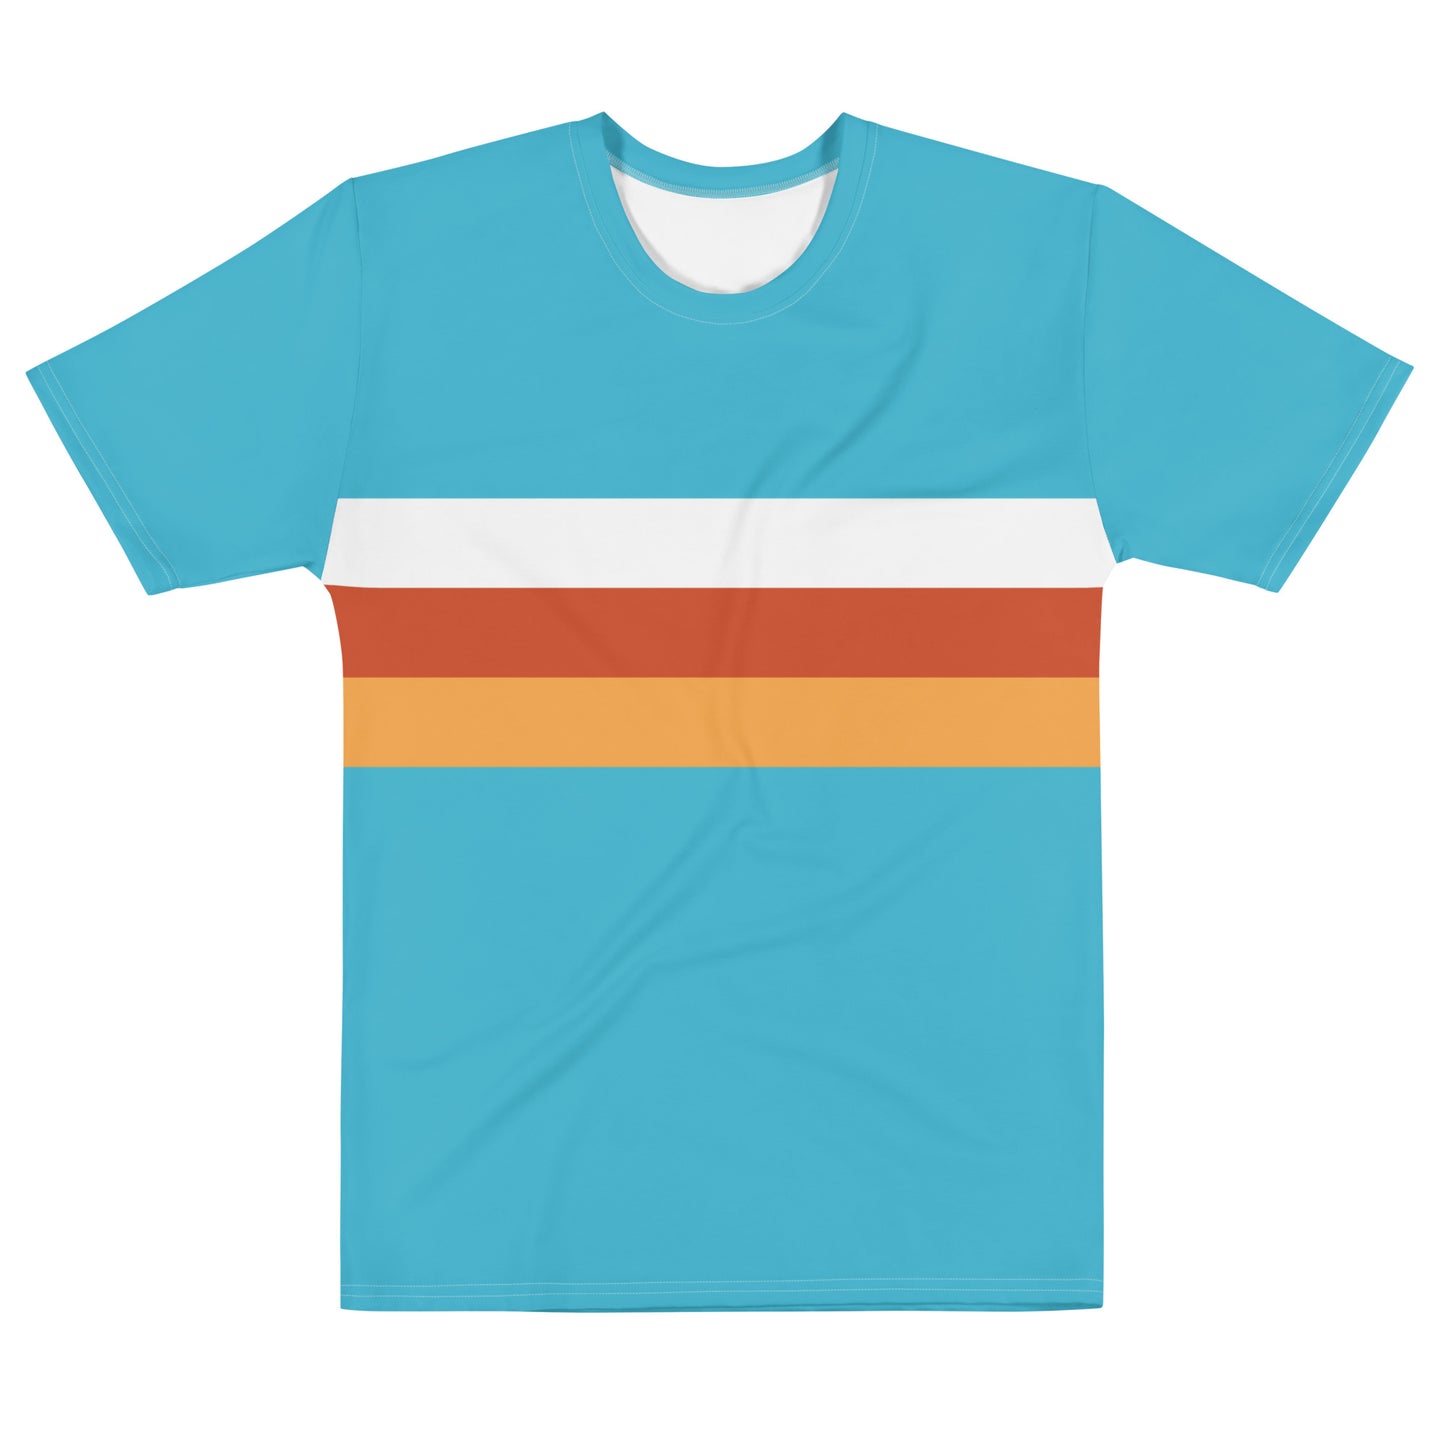 Urban 70s - Inspired By Taylor Swift - Sustainably Made Men’s Short Sleeve Tee